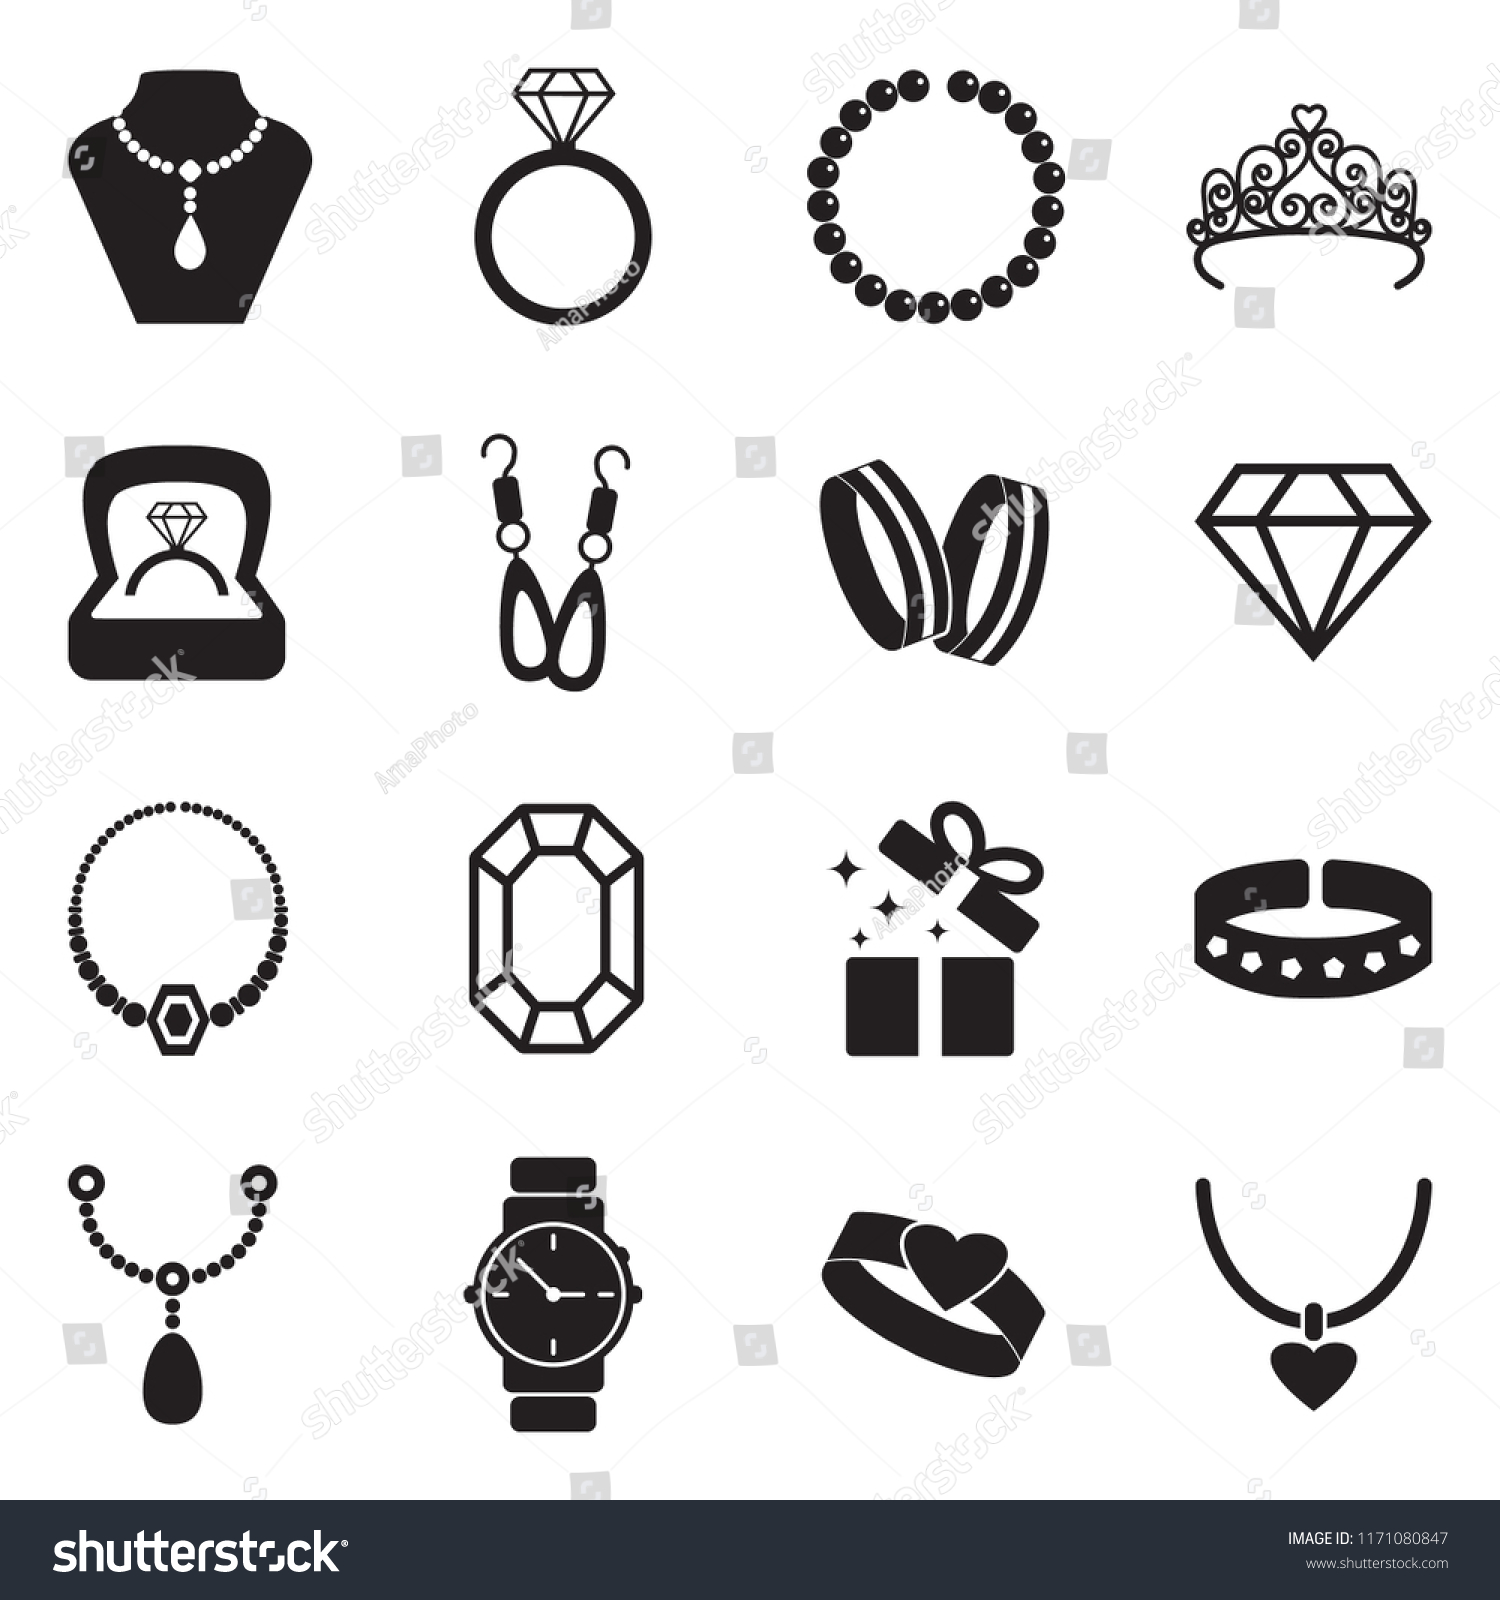 Jewelry Icons Black Flat Design Vector Stock Vector (Royalty Free ...